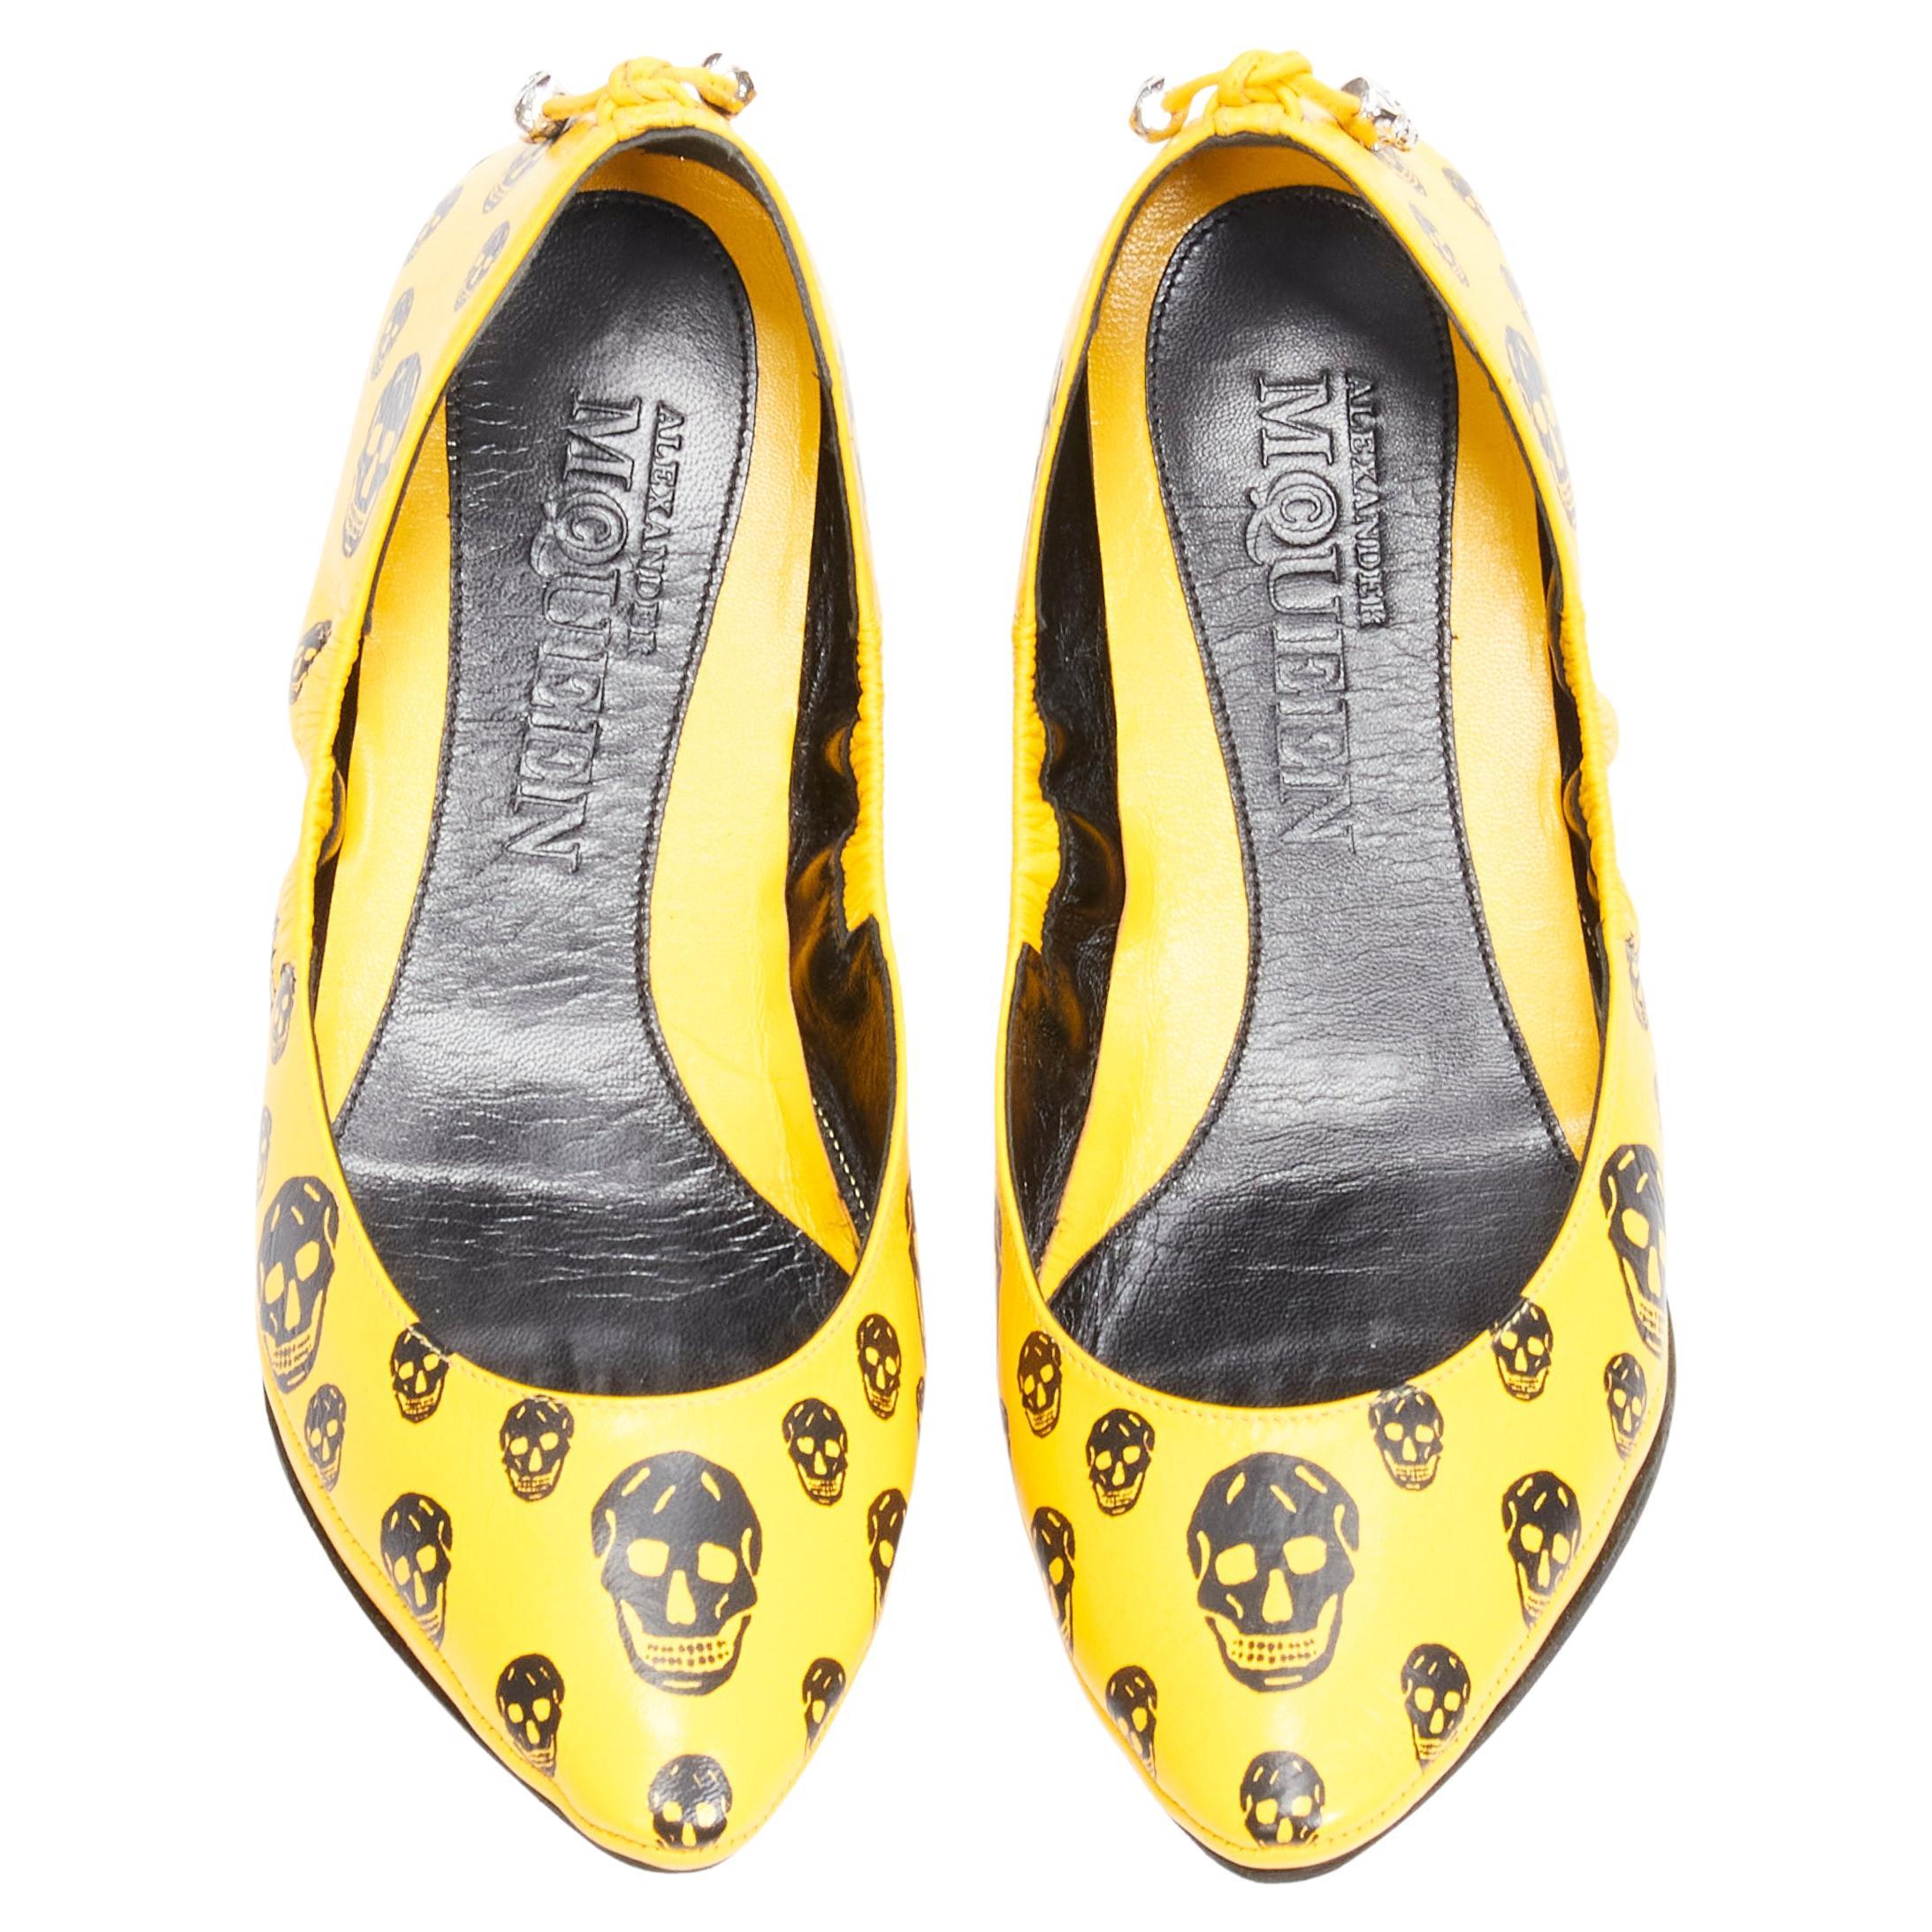 ALEXANDER MCQUEEN black yello Signature skull bow charm soft ballet flats EU37
Brand: Alexander McQueen
Material: Calfskin Leather
Color: Yellow
Pattern: Skull
Closure: Adjustable
Extra Detail: Silver-tone metal skull head charm at heel.
Made in: